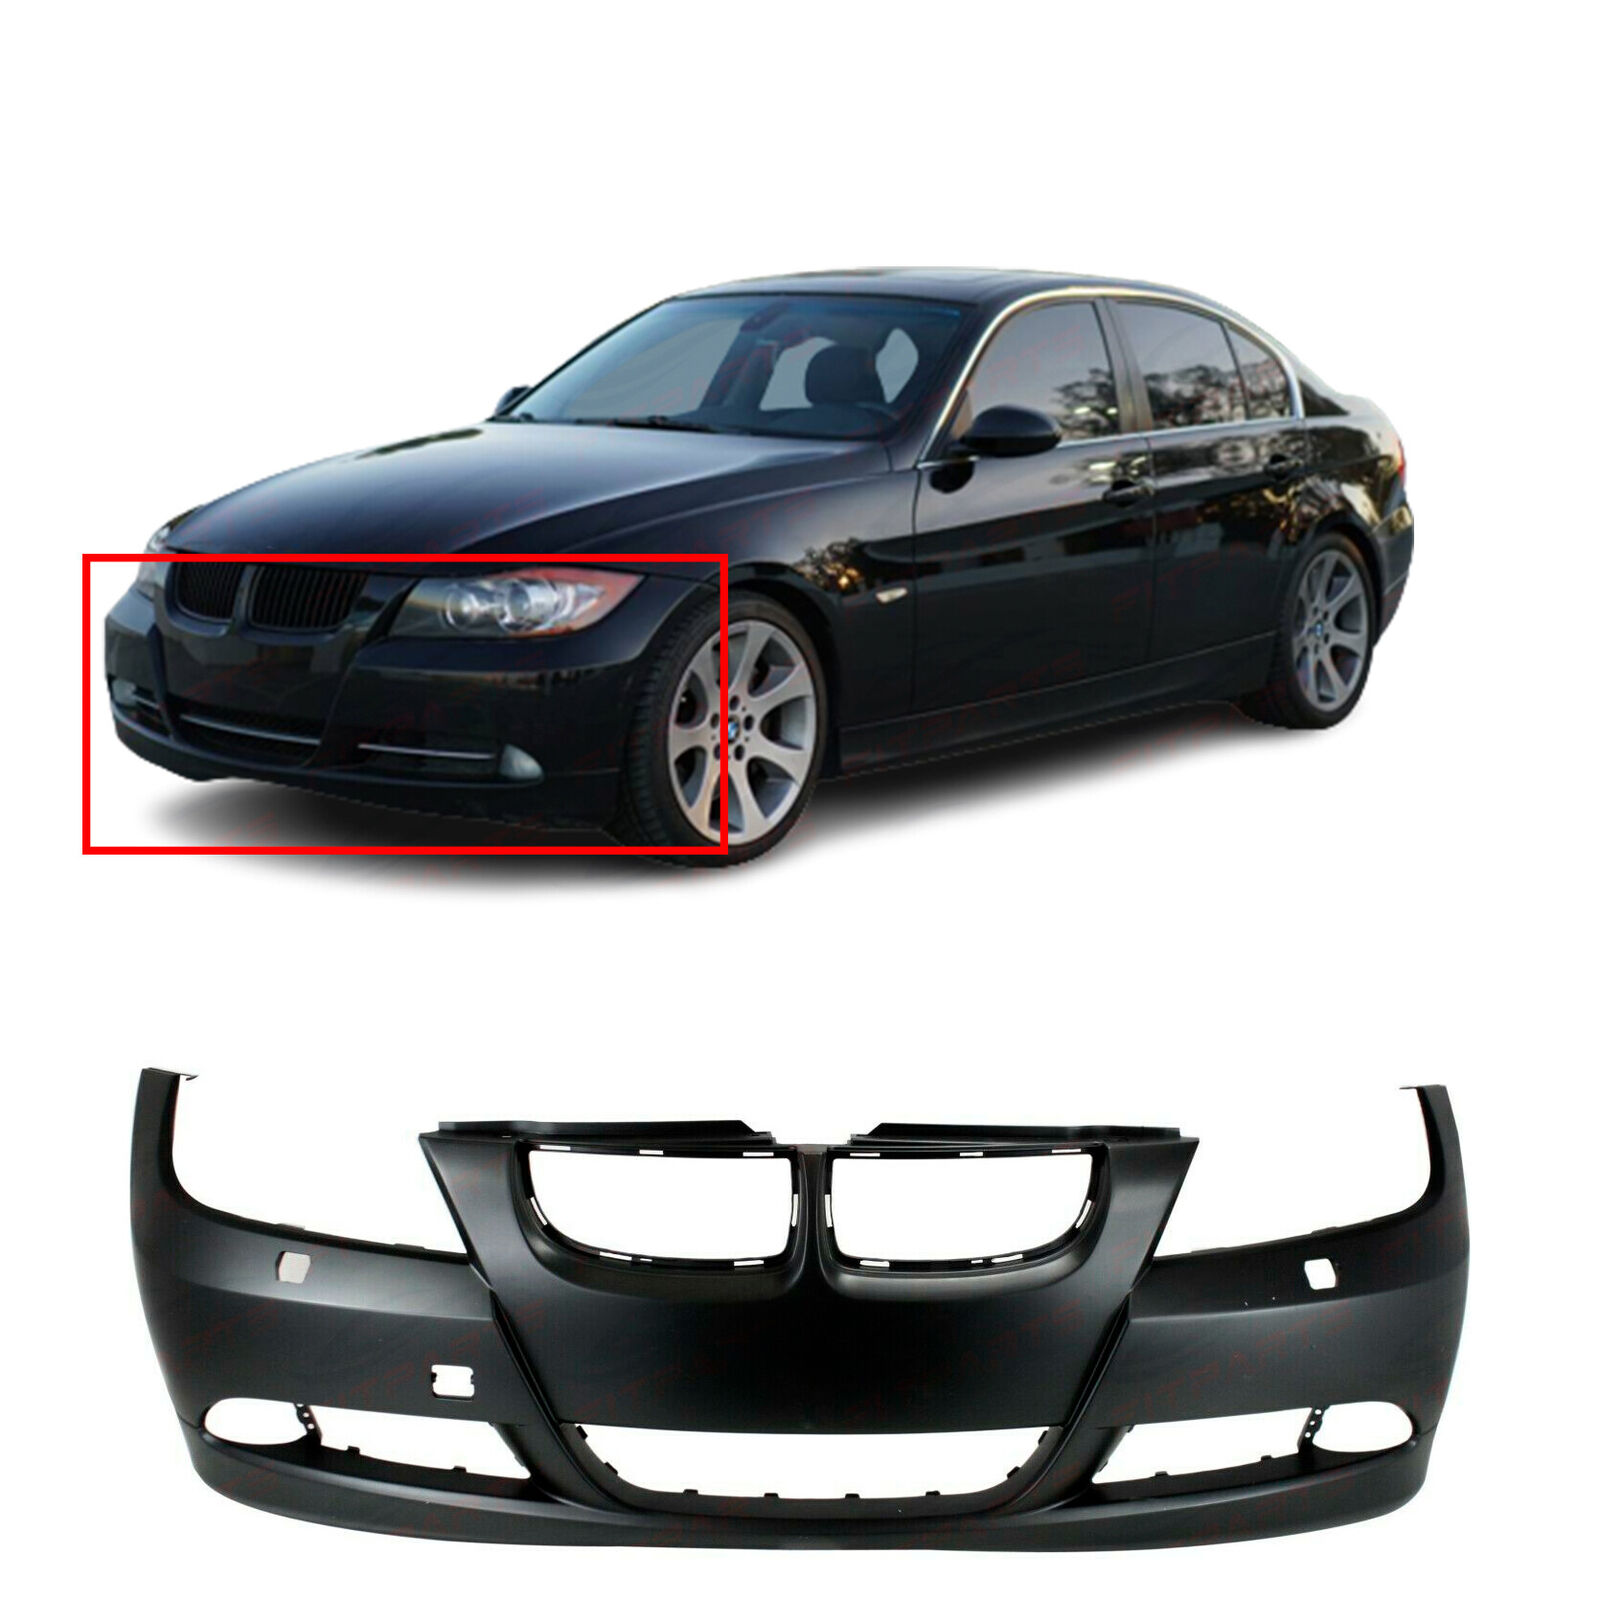 Front Bumper Cover for 2006 2007 2008 BMW 323 325 328 330 335 i/xi 3 series